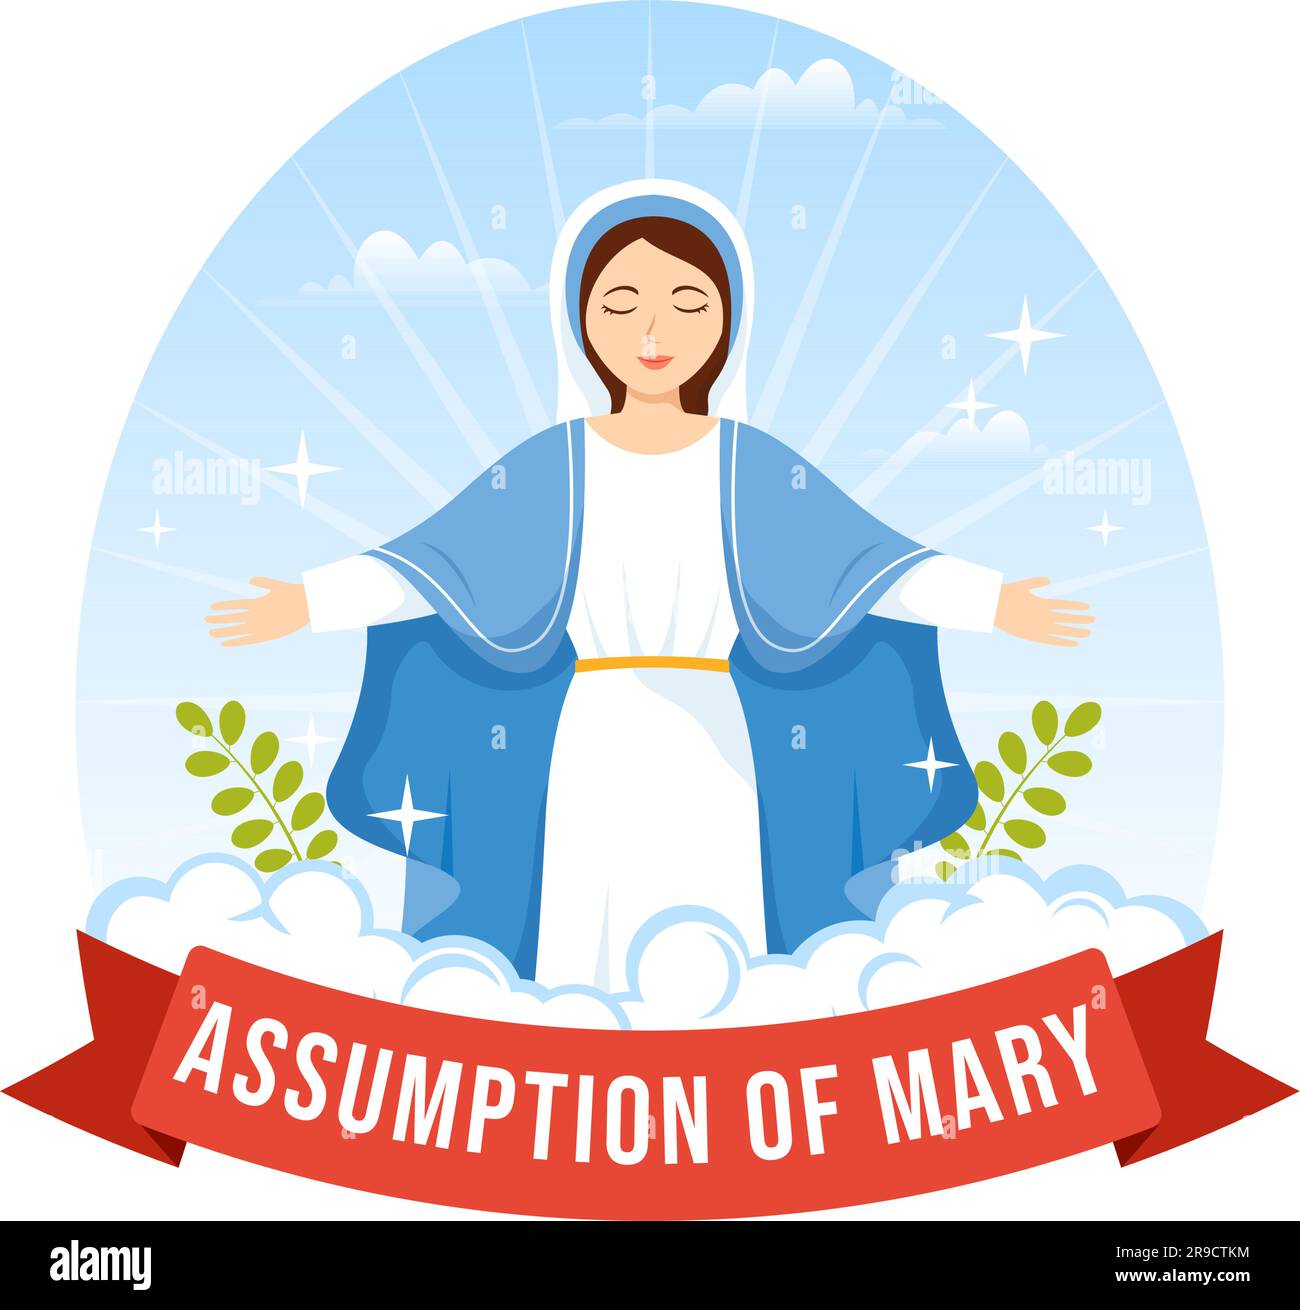 Assumption of Mary Vector Illustration with Feast of the Blessed Virgin and Doves in Heaven in Flat Cartoon Hand Drawn Background Templates Stock Vector